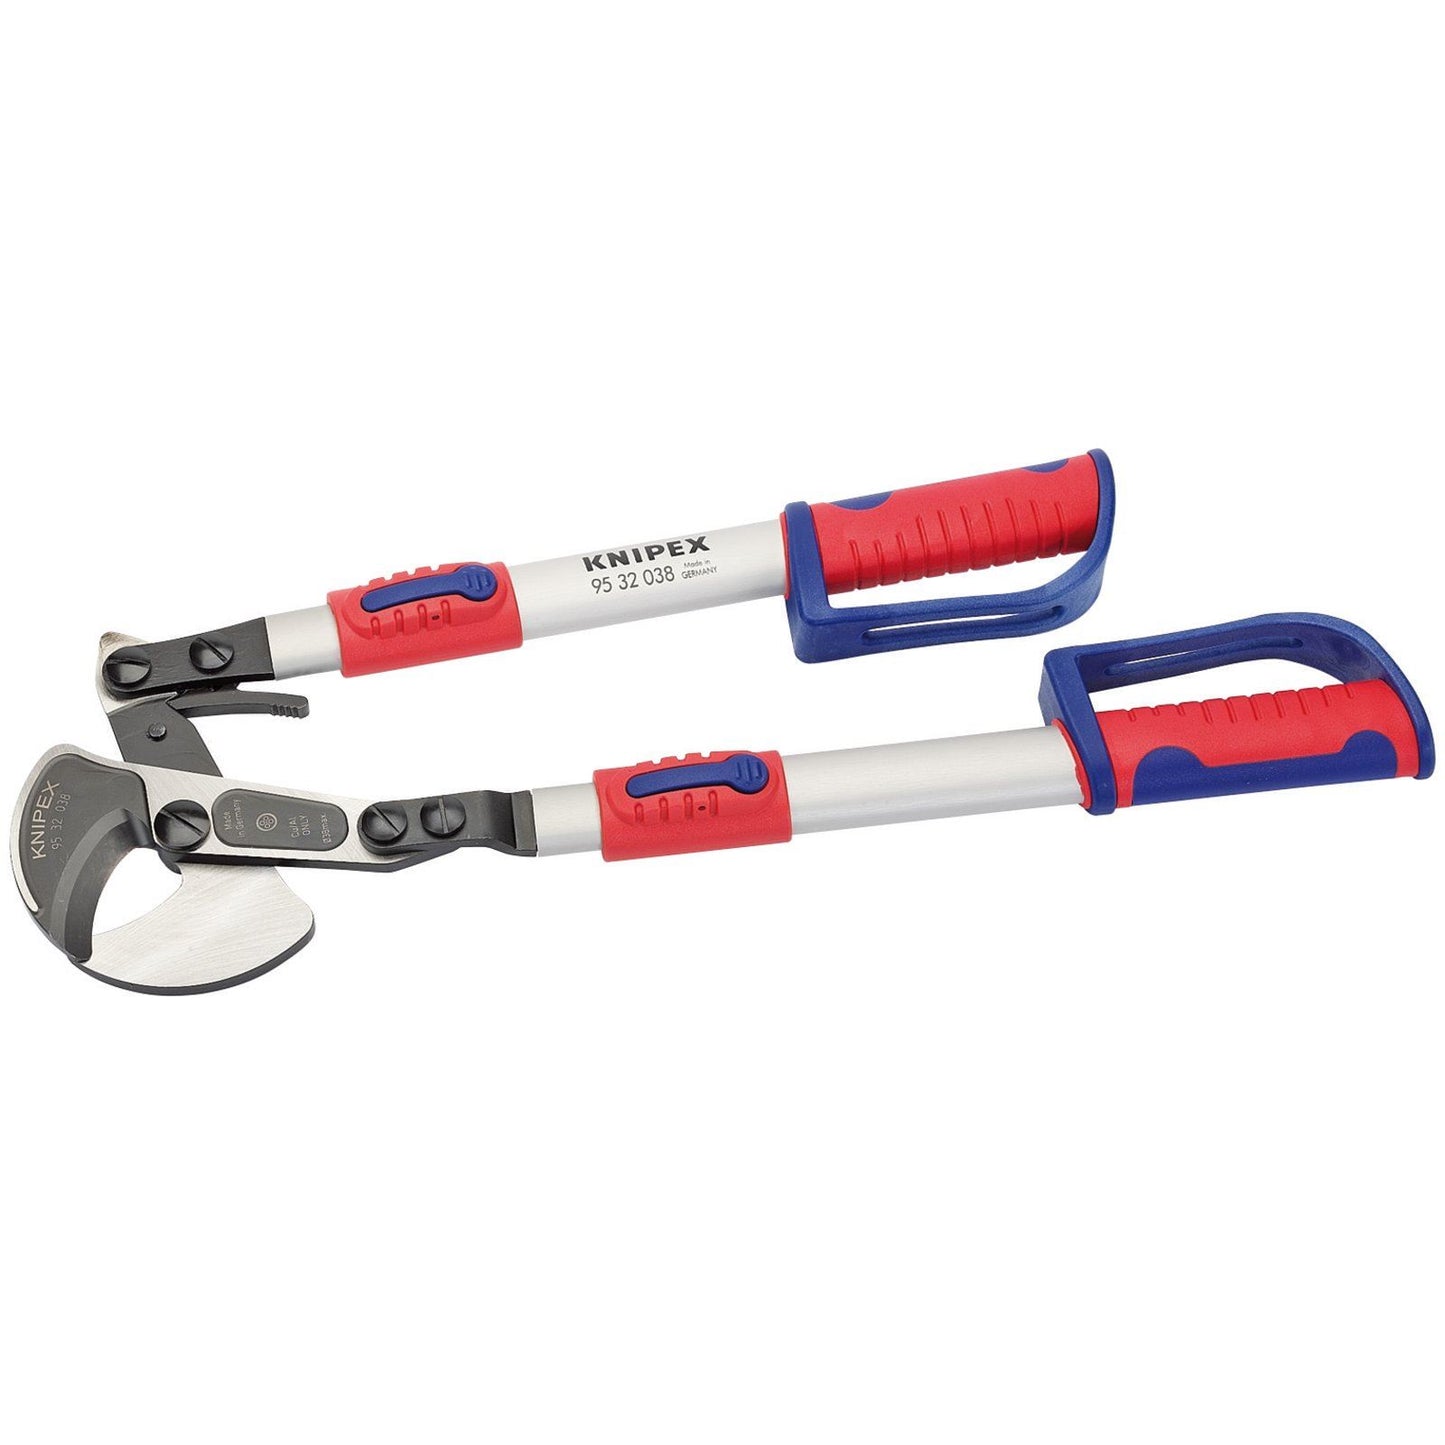 Knipex Knipex 95 32 038 Ratchet Action Telescopic Cable Shears - 36321